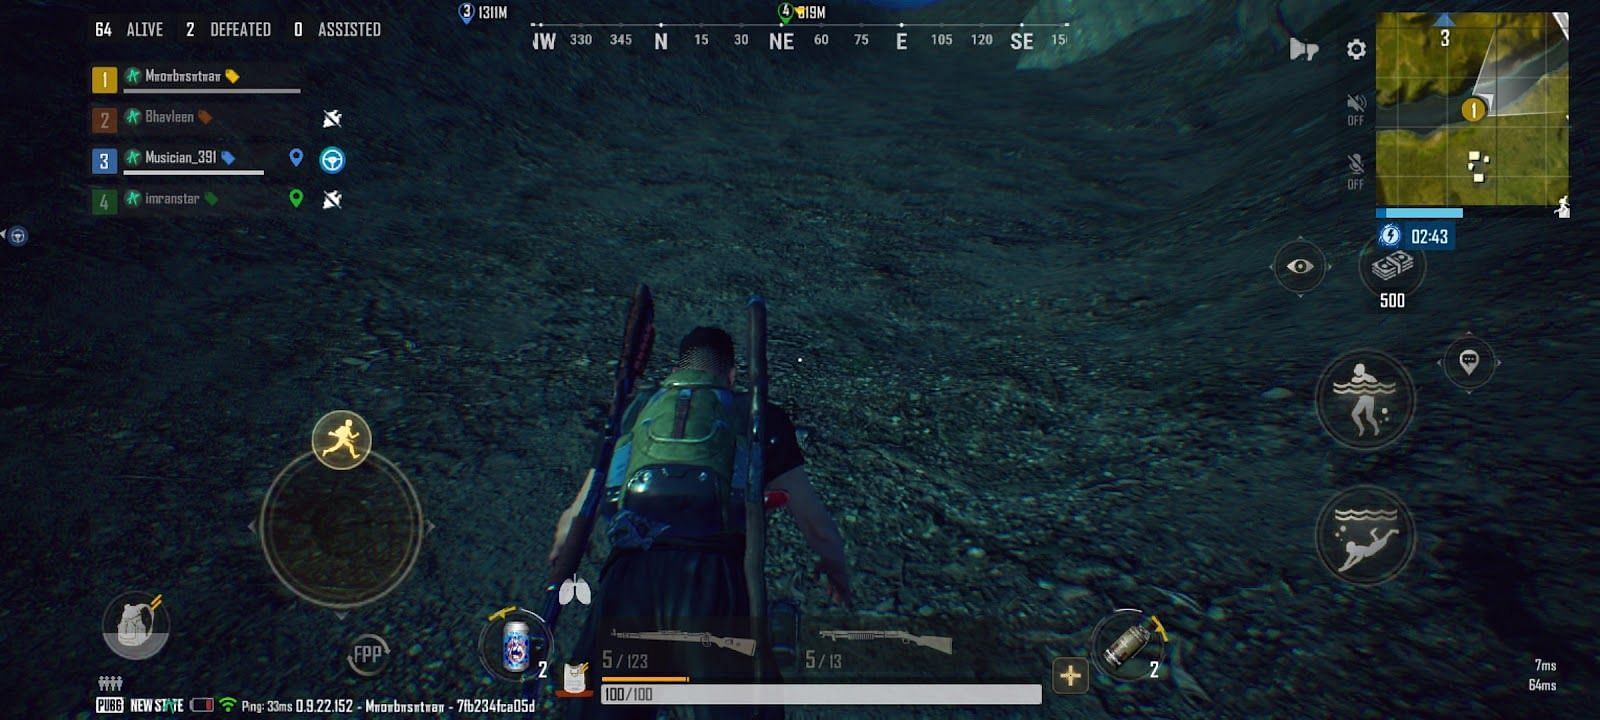 An effect of the refraction of light underwater (Image via PUBG New State)